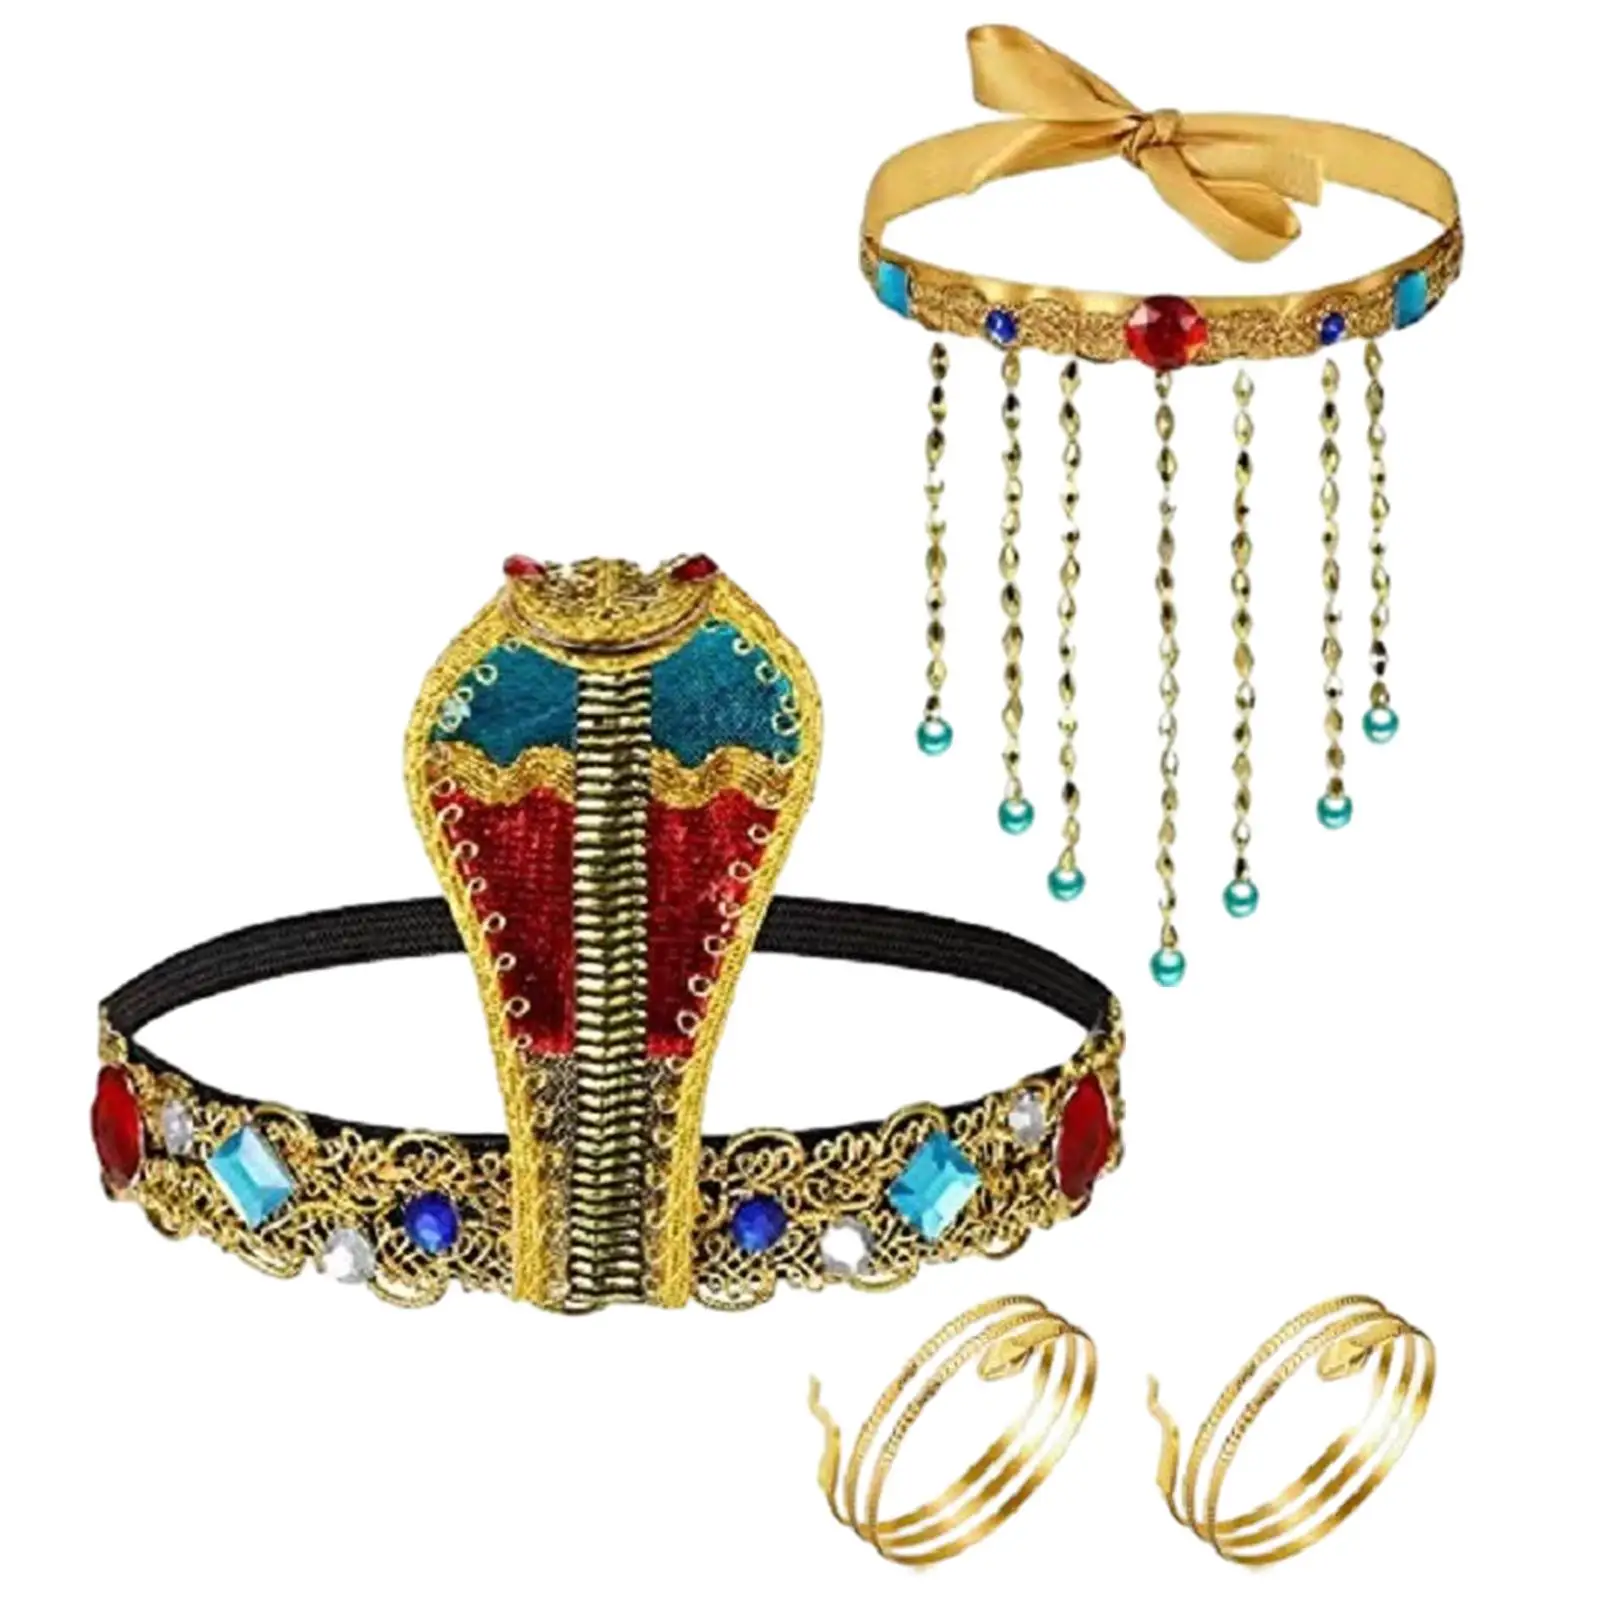 4Pcs Egypt Queen Costume Accessories Jewelry Exquisite Egypt Queen Headdress for Holidays Masquerade Event Photo Props Halloween